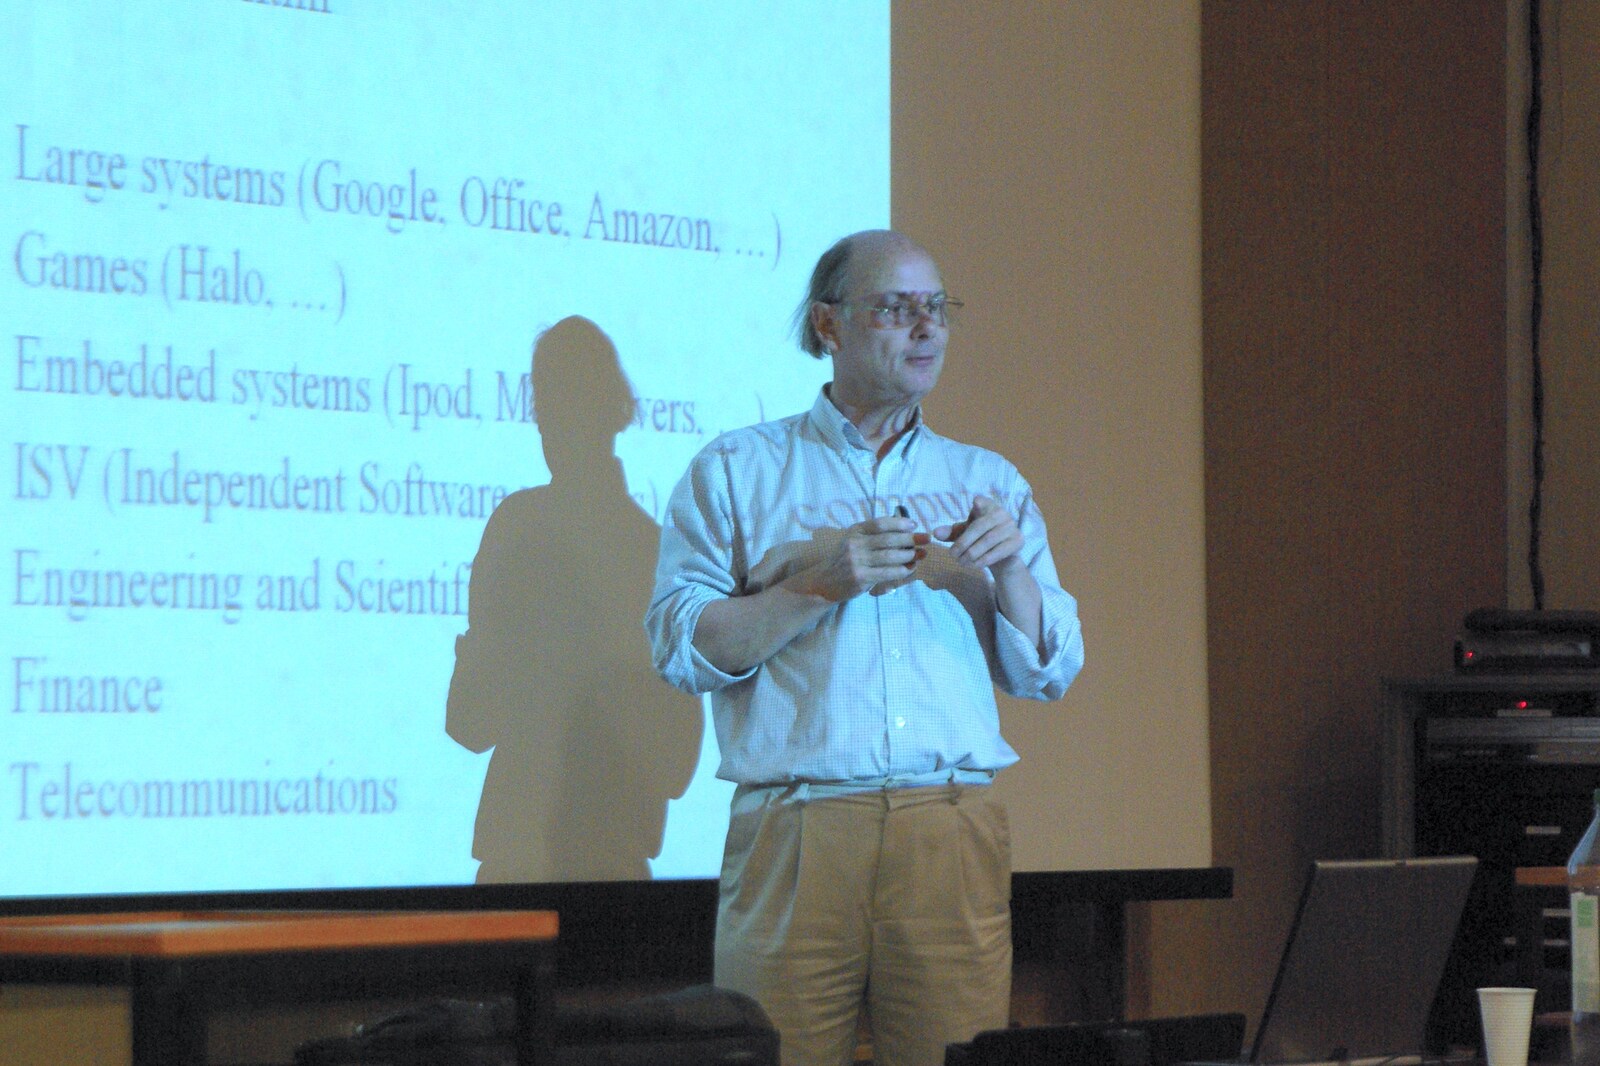 Bjarne gives a lecture from Science Park Demolition, Bjarne Stroustrup, and Taptu/Qualcomm Miscellany, Cambridge - 29th April 2007